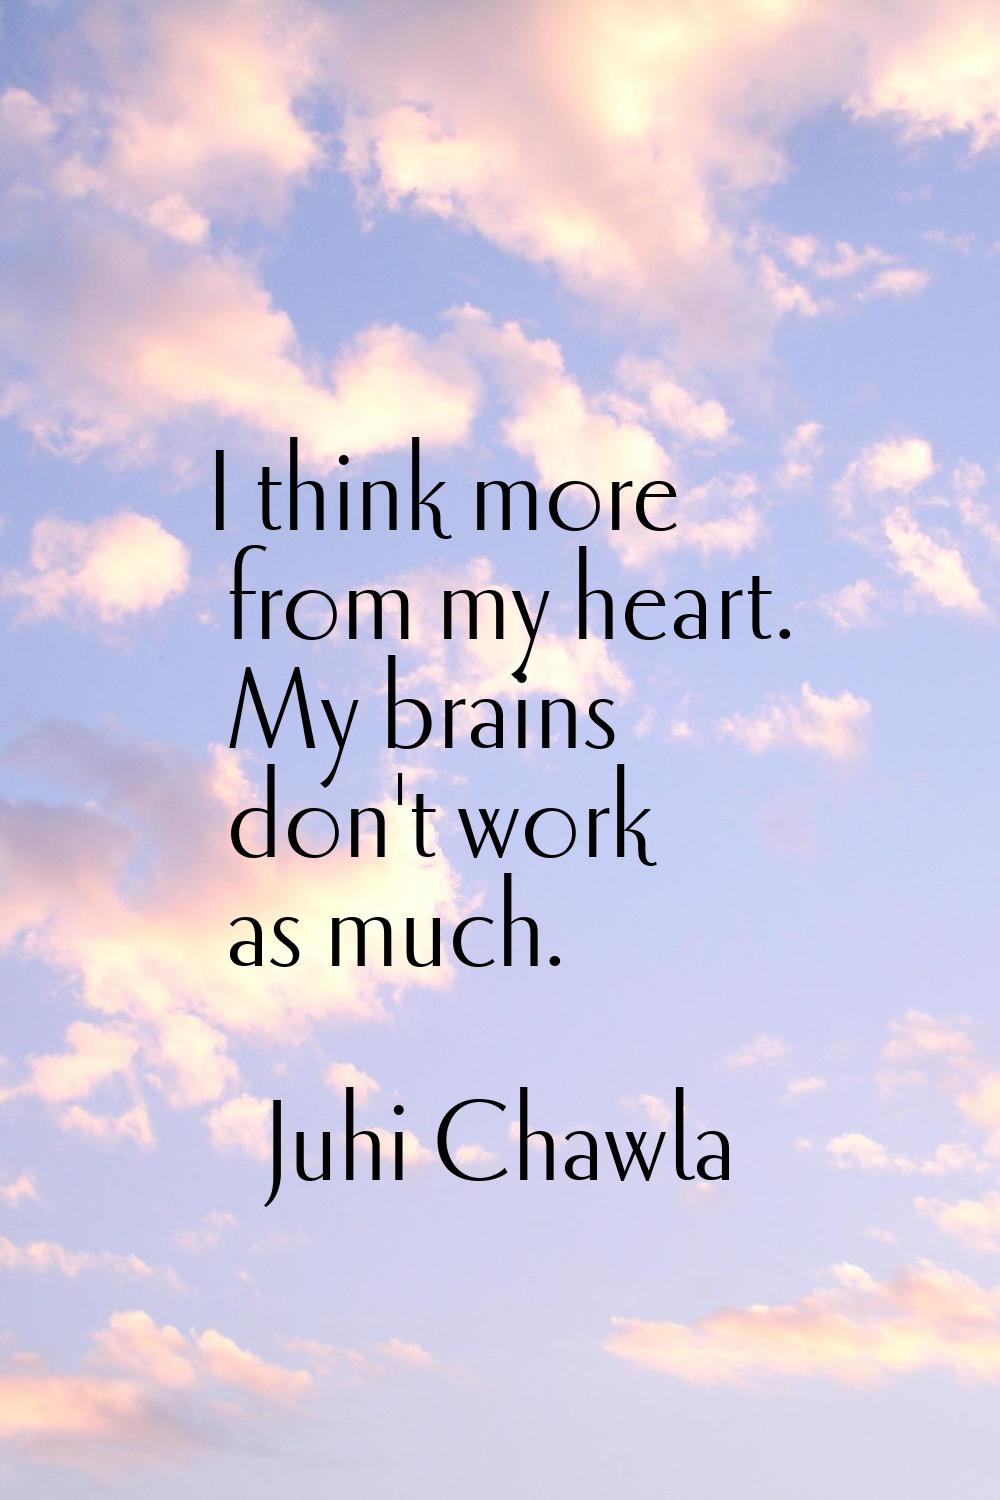 I think more from my heart. My brains don't work as much.